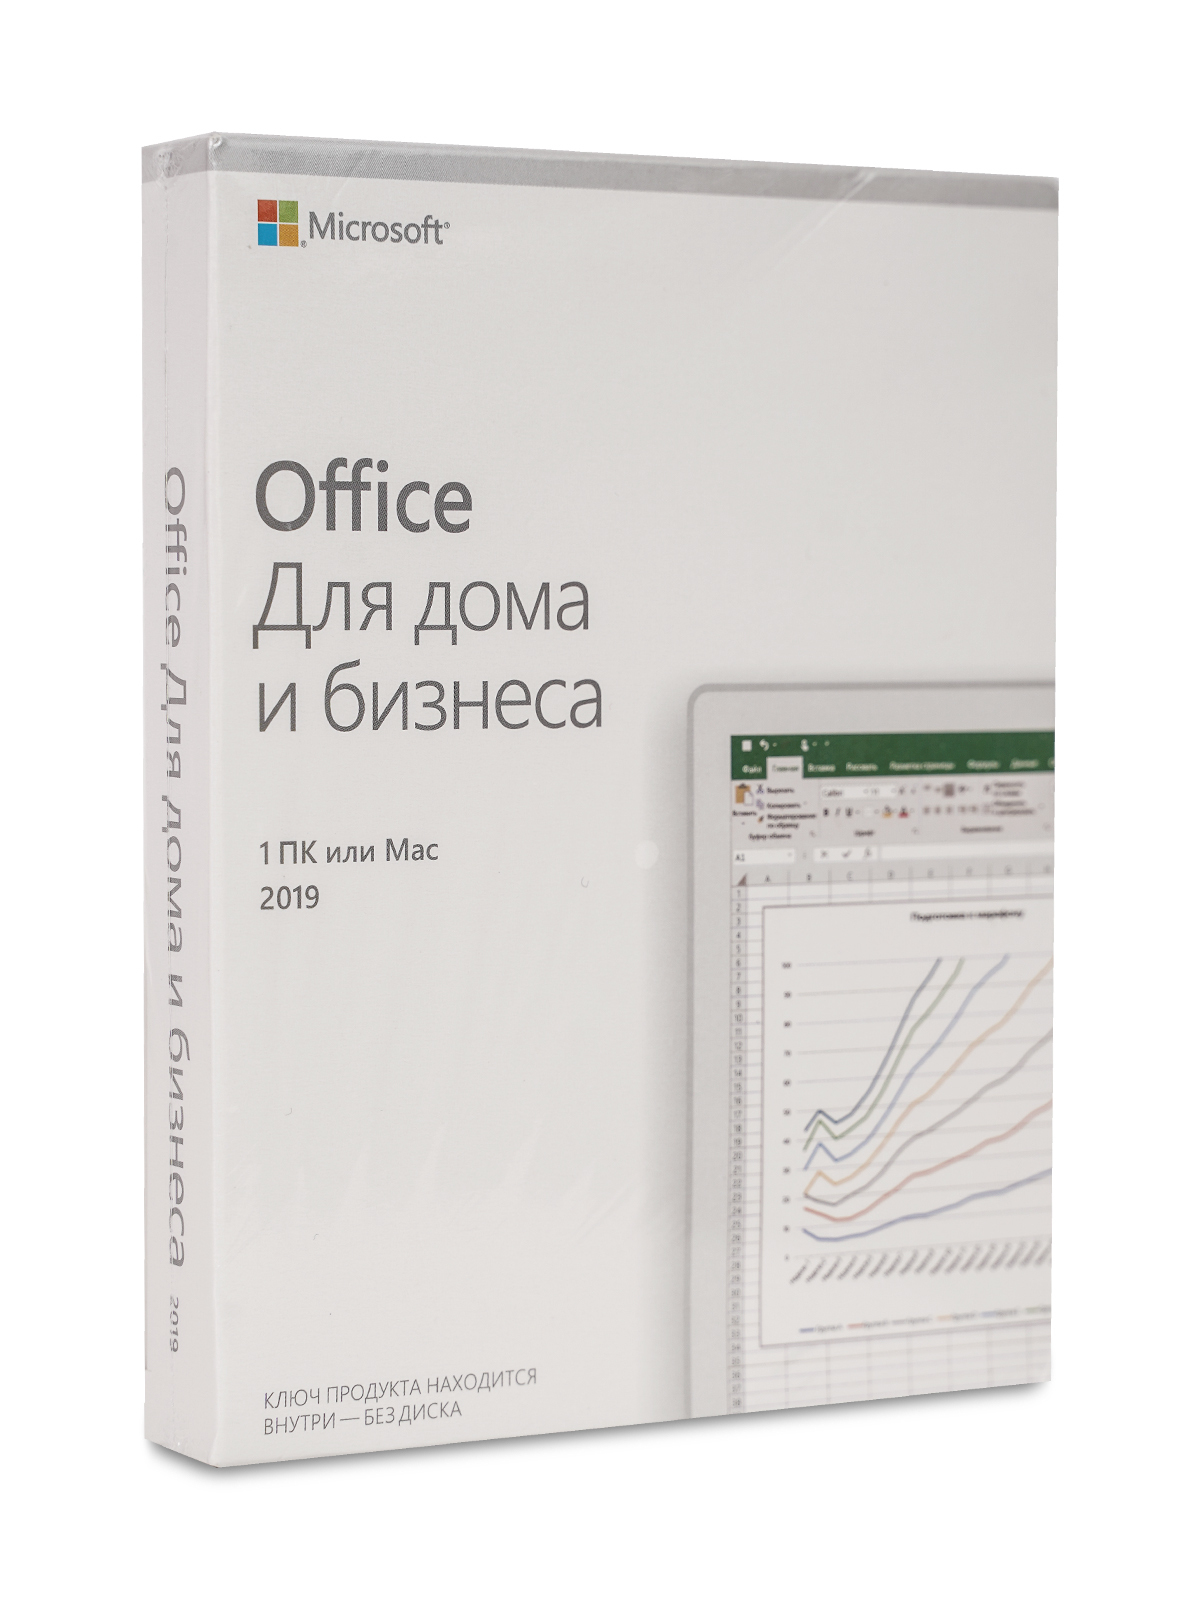 Home and business 2019. Microsoft Office 2019 Home and Business. По Office Home and Business 2019. Microsoft Office Home and Business 2019 Rus (t5d-03361 OEM). Microsoft Office Home and Business 2019 Rus (Box).